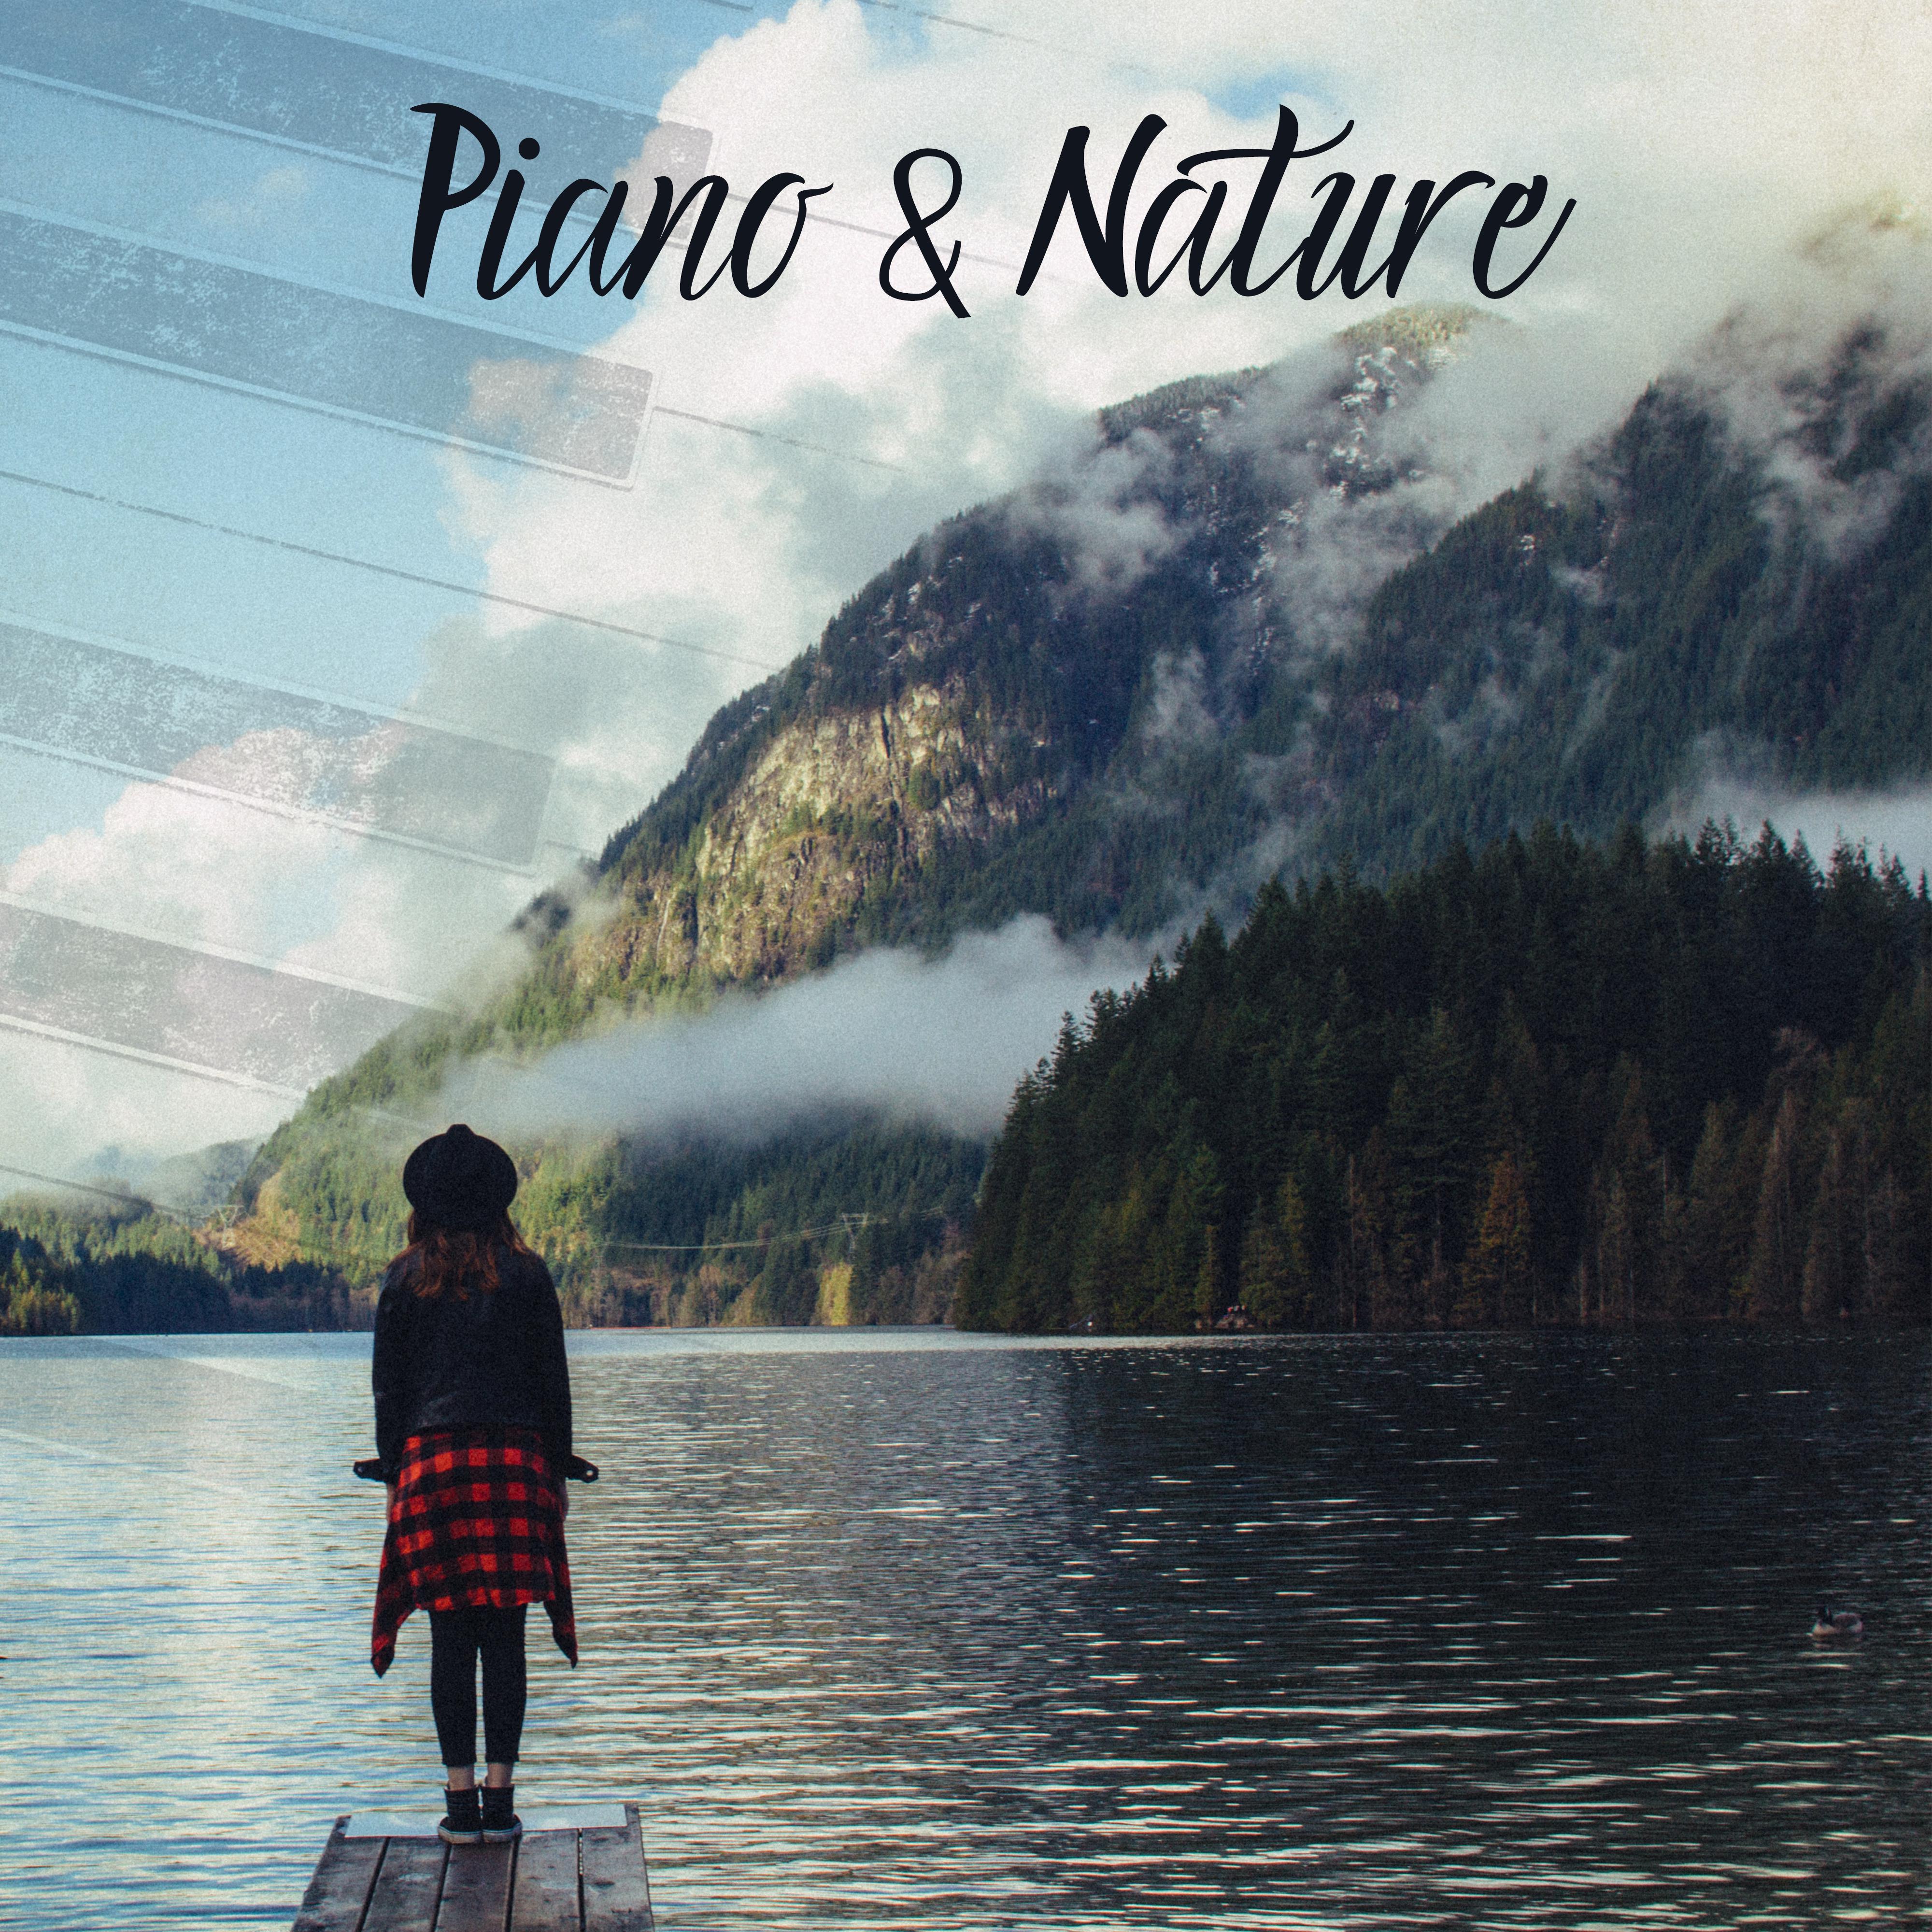 Piano & Nature: 15 New Age Piano Songs 2019 with Nature Background, Sounds of Birds, Forest, Wind & Water, Music for Calming Down, Perfect Full Relaxing, Stress Reduce & Good Sleep After Tough Day